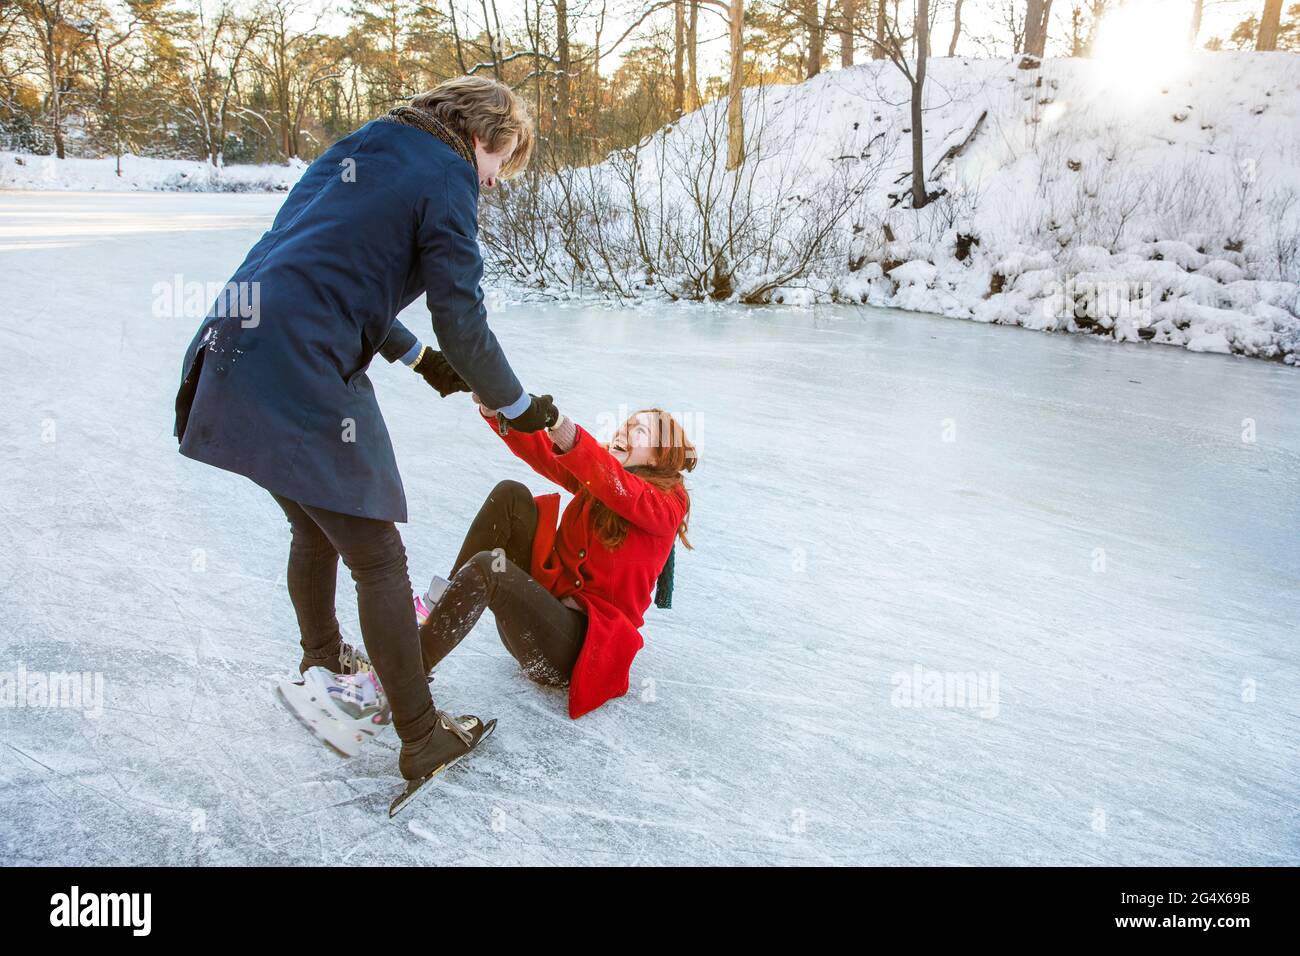 Boyfriend holding hands of girlfriend while getting up on frozen lake Stock Photo